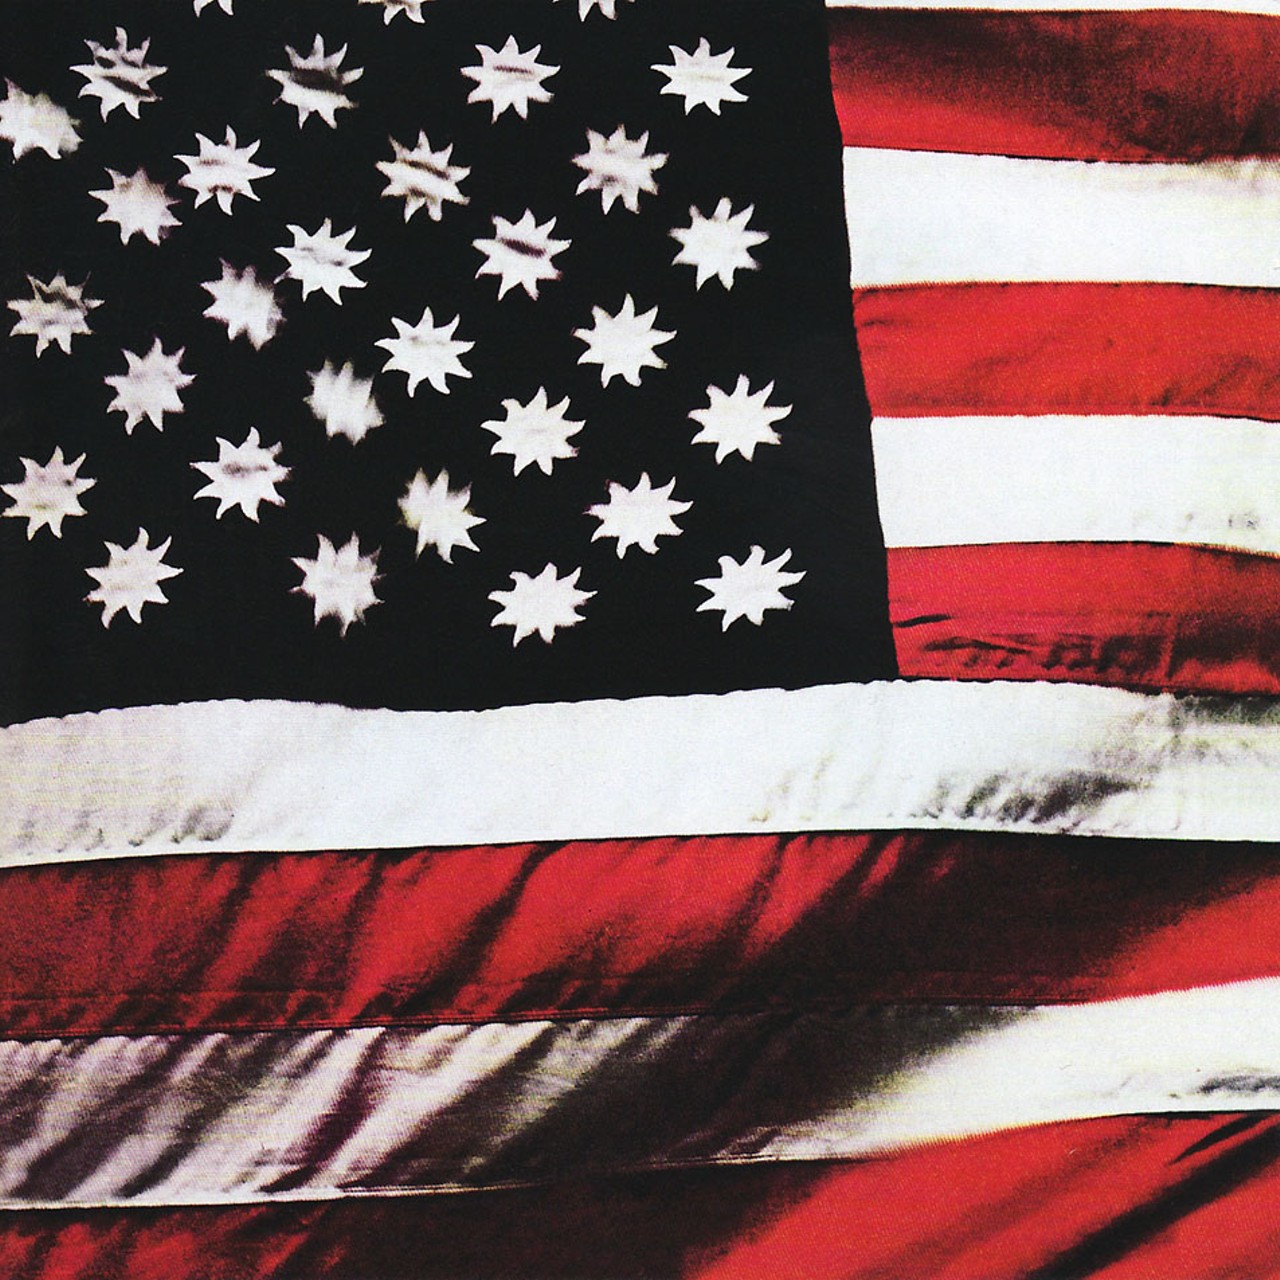 Sly and the Family Stone - There's a Riot Goin' On (1971)
There's a Riot Goin' On by Sly and the Family Stone, released in 1971. The original art had a red, white and black flag with suns instead of stars. Sly told a fan website, "Betsy Ross did the best she could with what she had. I thought I could do better."